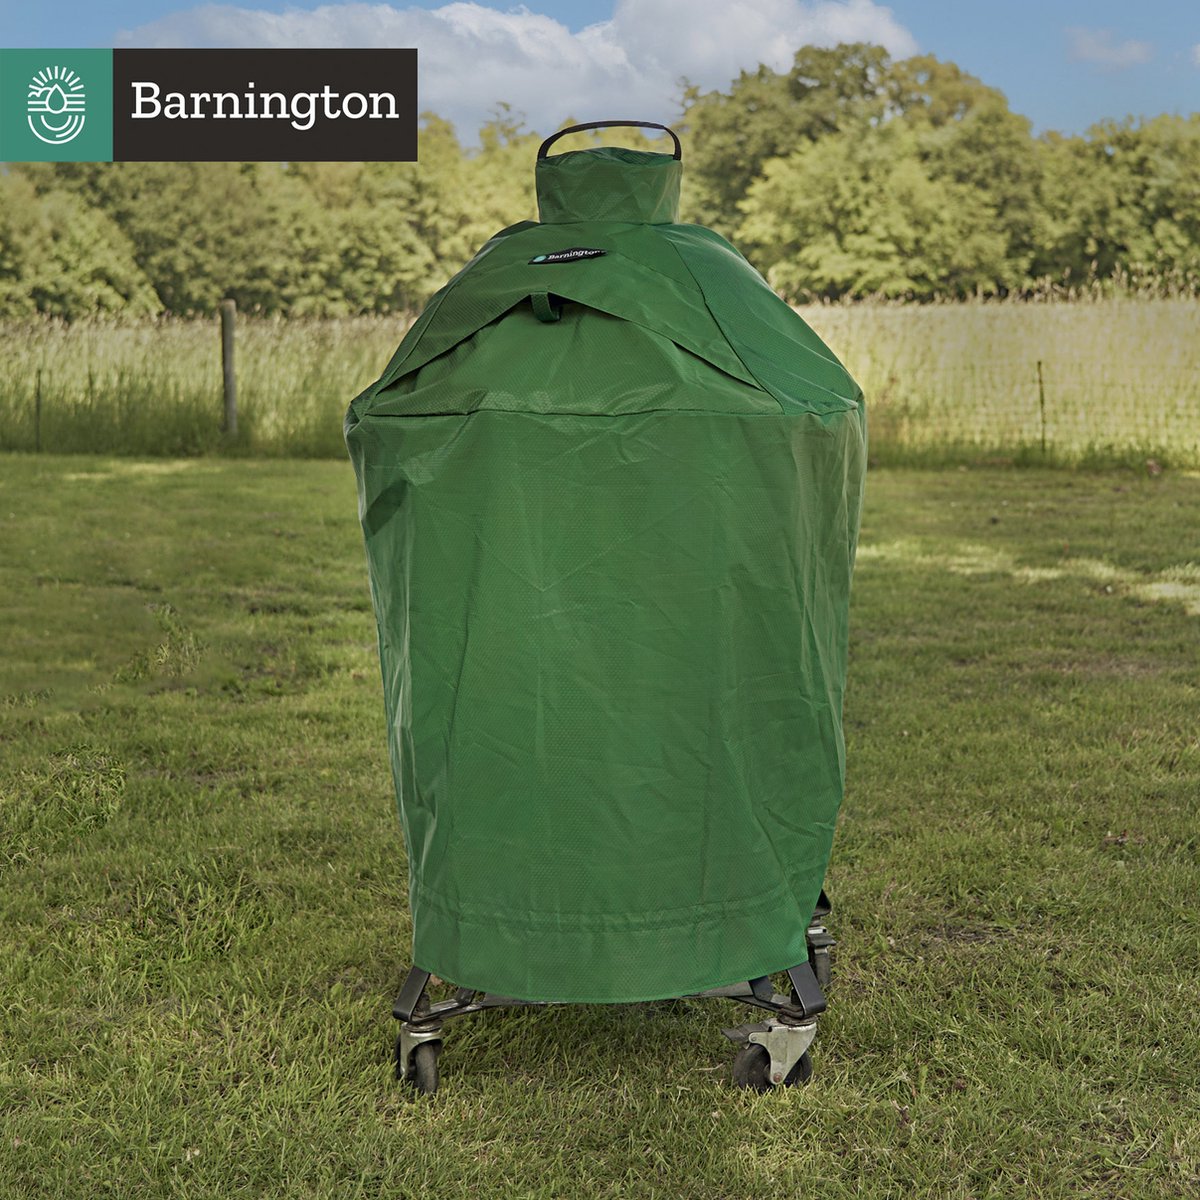 Barbecuehoes voor kamadobarbecues - 70x105cm (diam. x hoogte) - Barnington Outdoor Covers